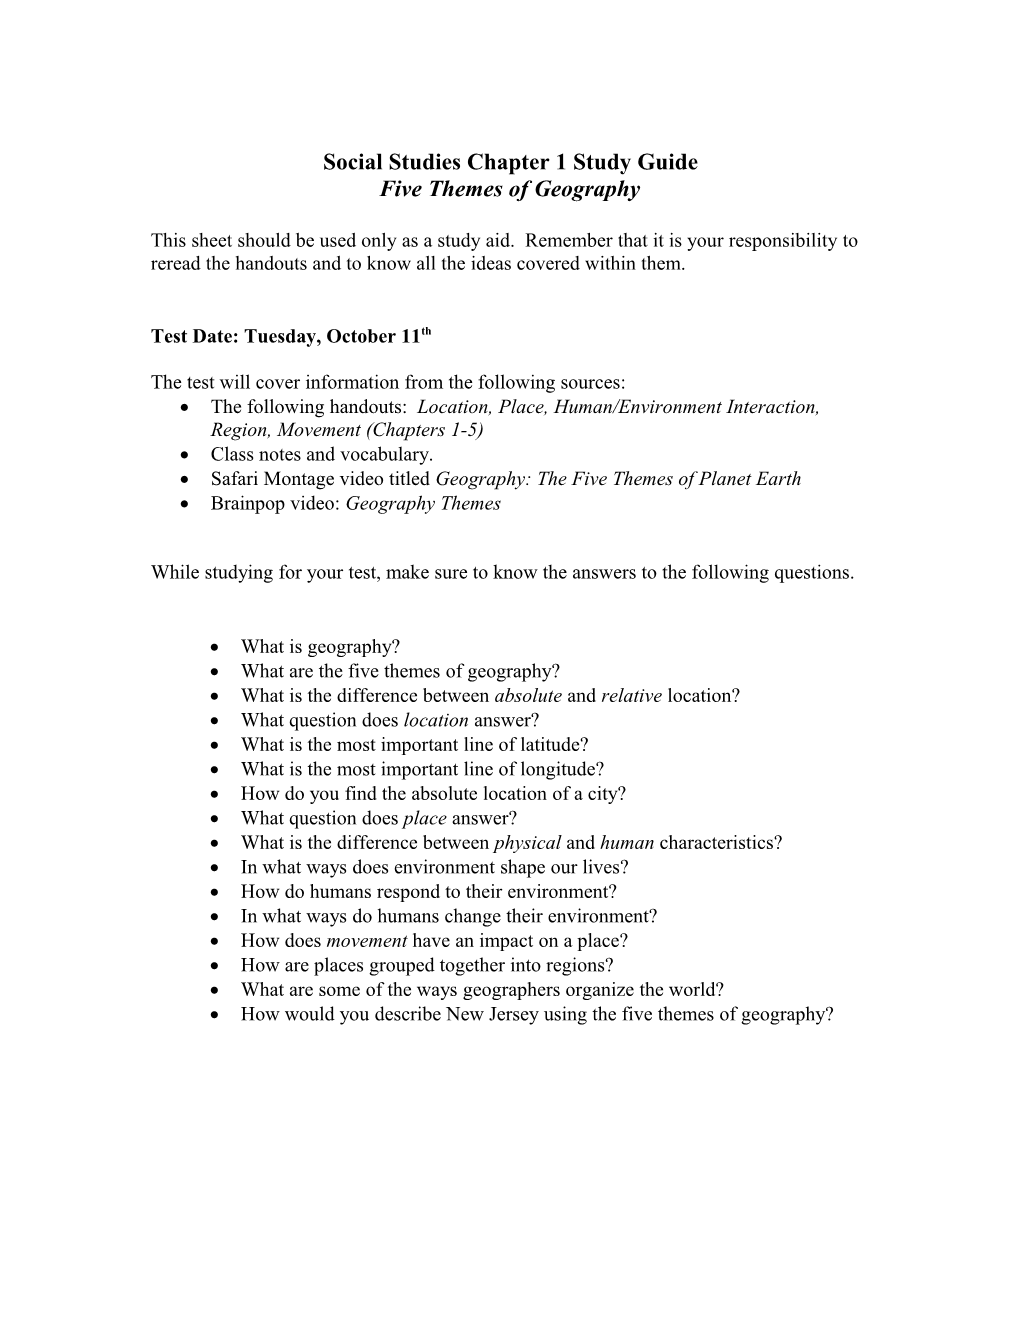 Social Studies Chapter 1 Section 1 Review Sheet